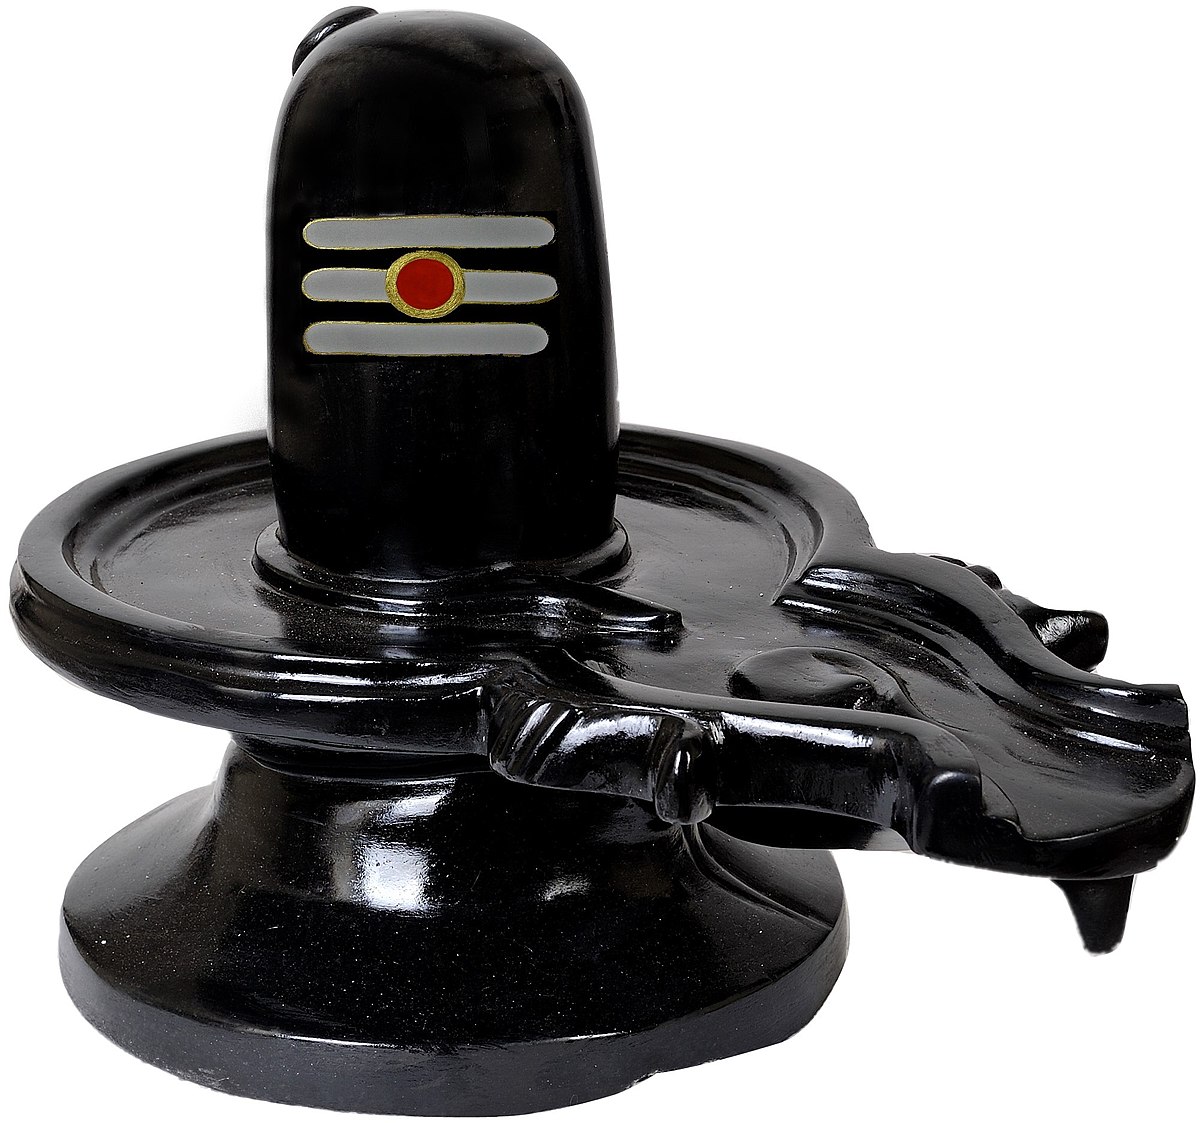 NEOLITHIC AGE SIVA LINGA DISCOVEREDThe discovery of the Siva linga has thrown light on  the religious  practices of  Neolithic civilisations  during  which  people  used  to worship  idols  of  Gods  and  Goddesses  in standing posture.